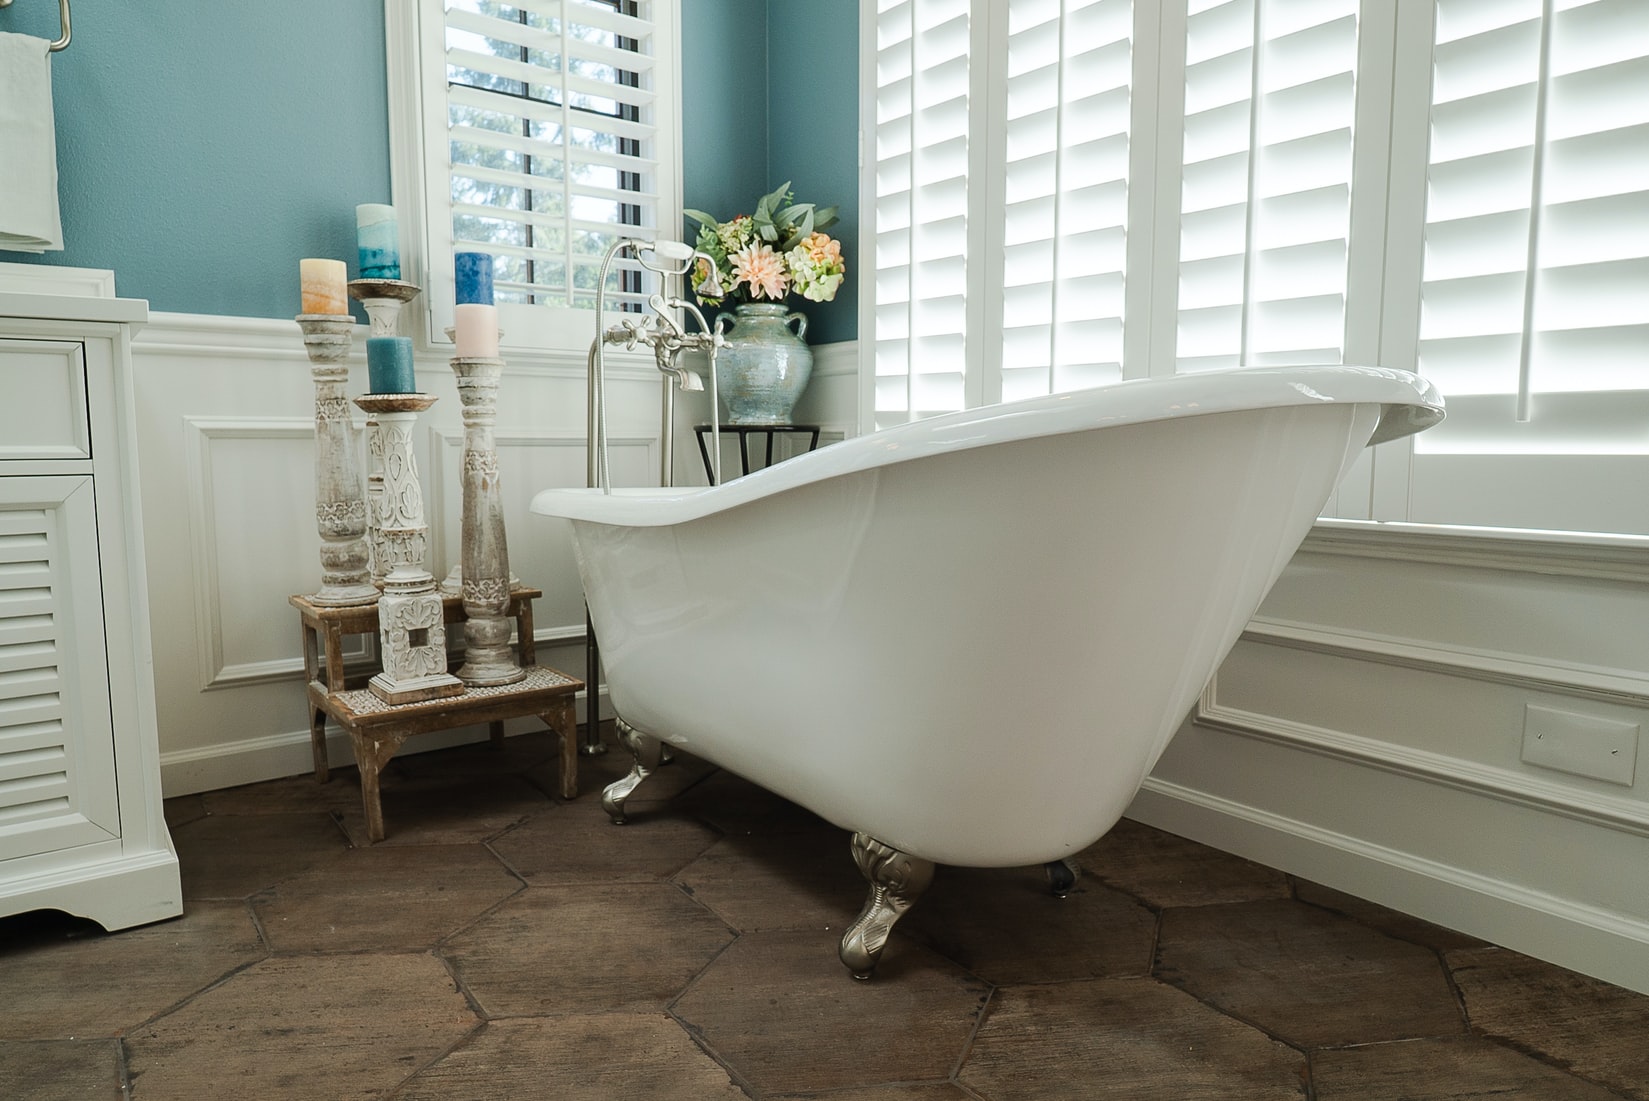 How To Remove A Bathtub Without Damaging Tiles